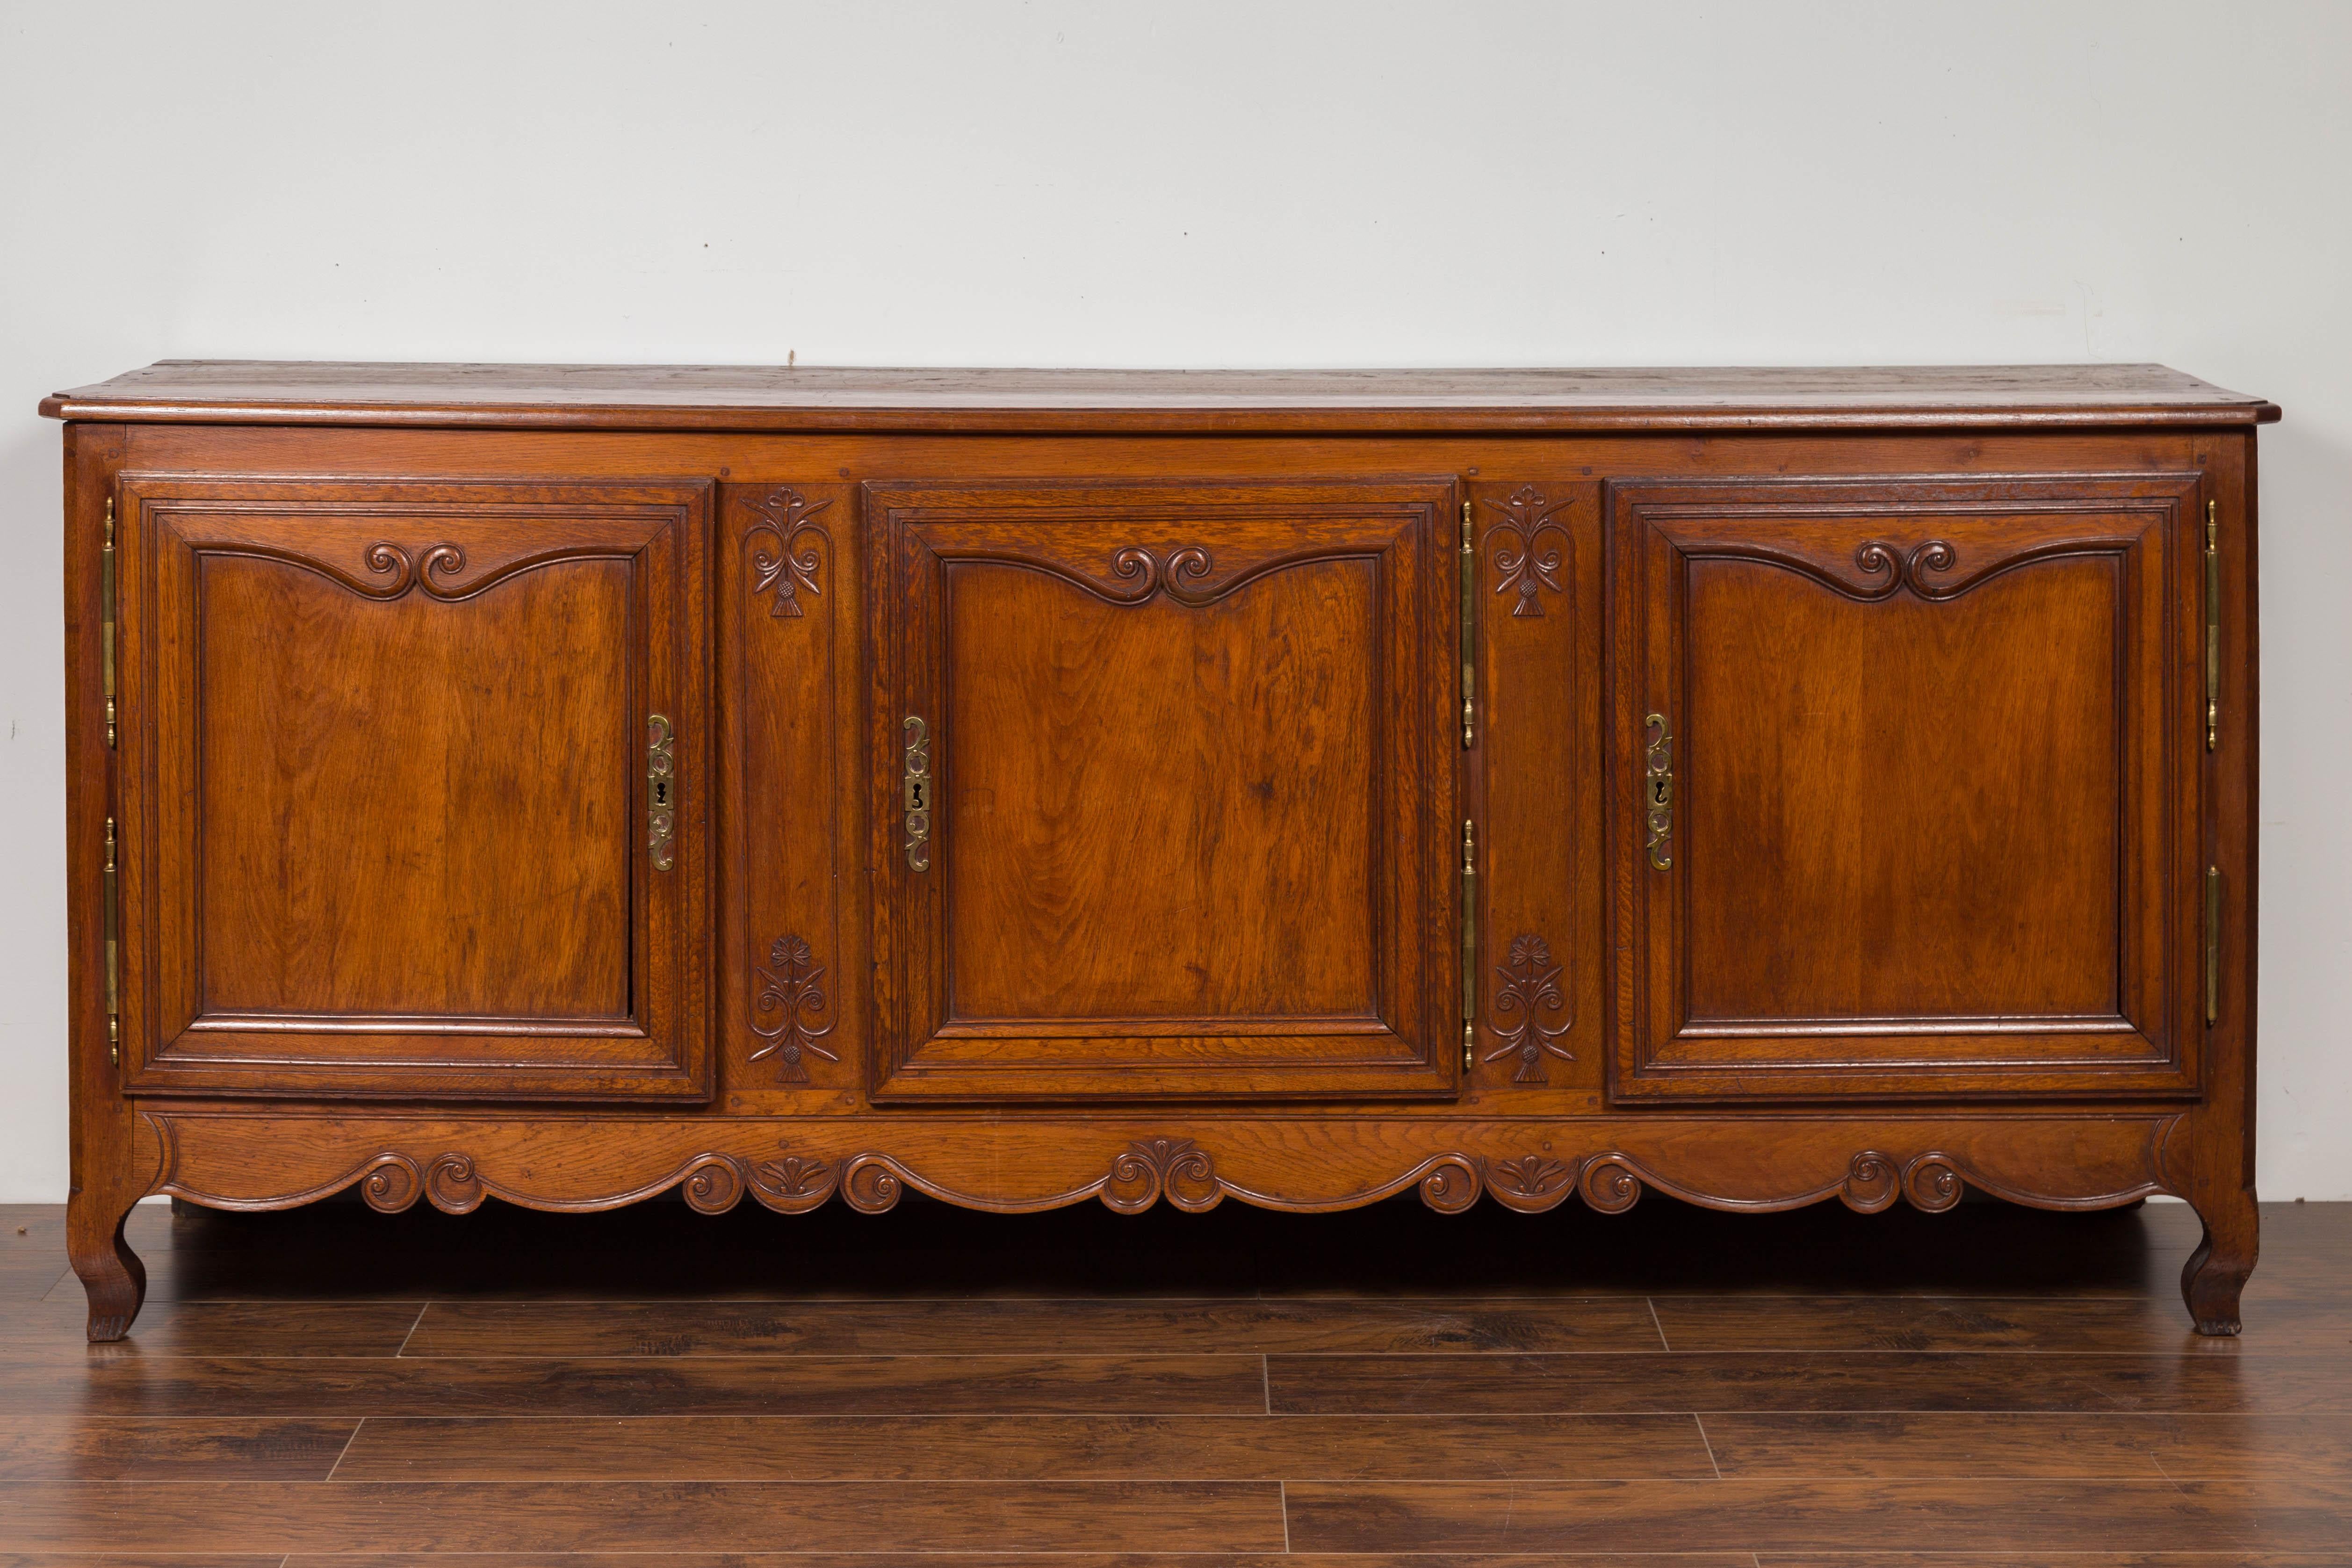 A French three-door oak enfilade from the late 19th century, with scrolled motifs and cabriole legs. Born in France at the end of Emperor Napoleon III's reign, this oak enfilade features a rectangular top with canted corners in the front, sitting